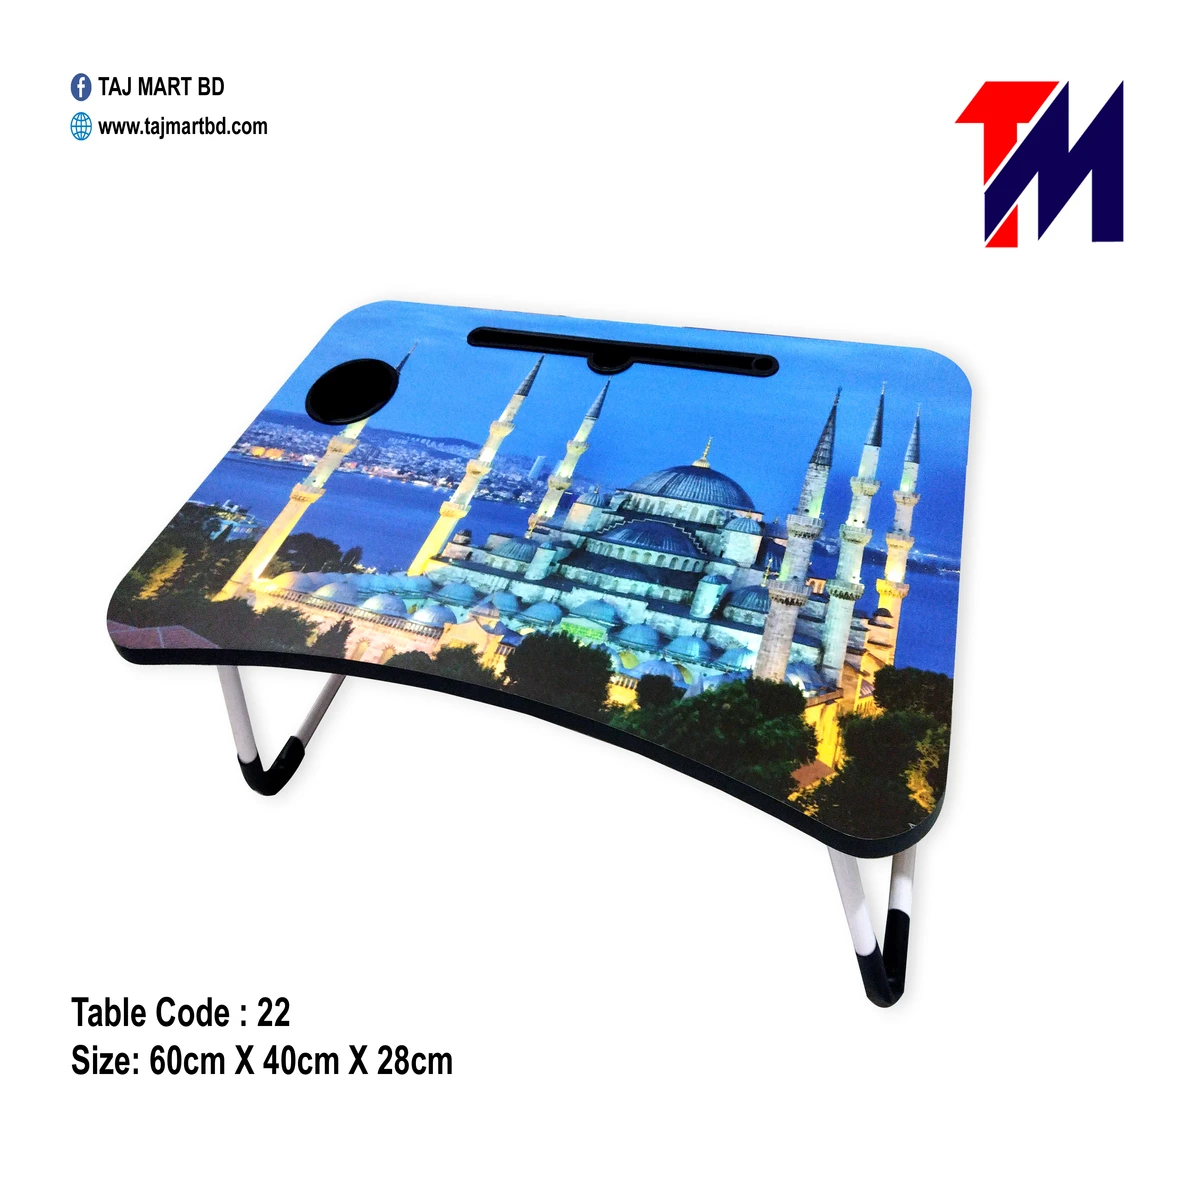 Foldable Laptop Table & Kids Reading Table Code 22